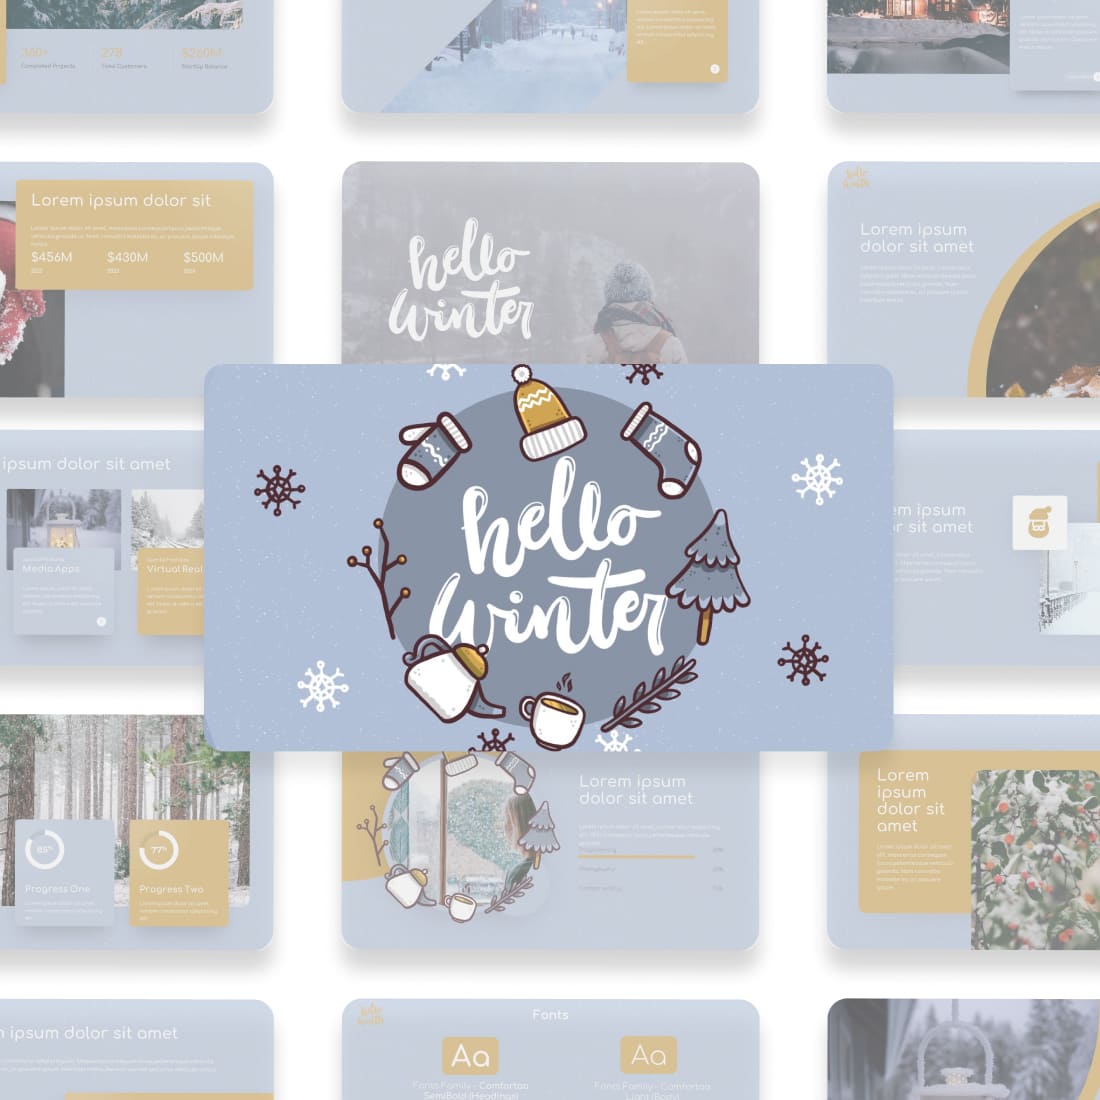 Hello Winter Powerpoint Template cover.